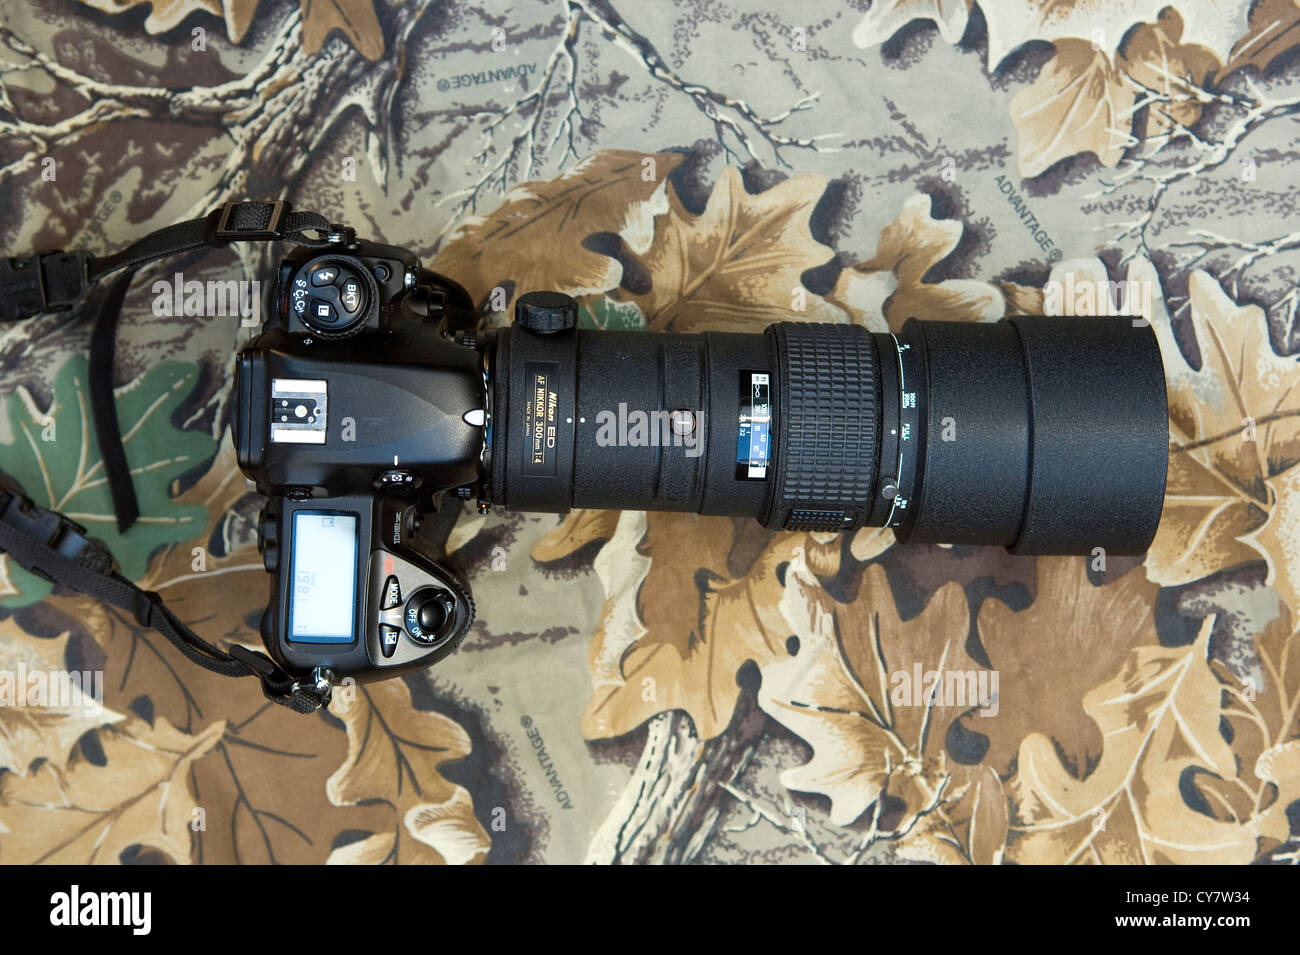 Nikon digital camera with 300mm lens attached Stock Photo - Alamy